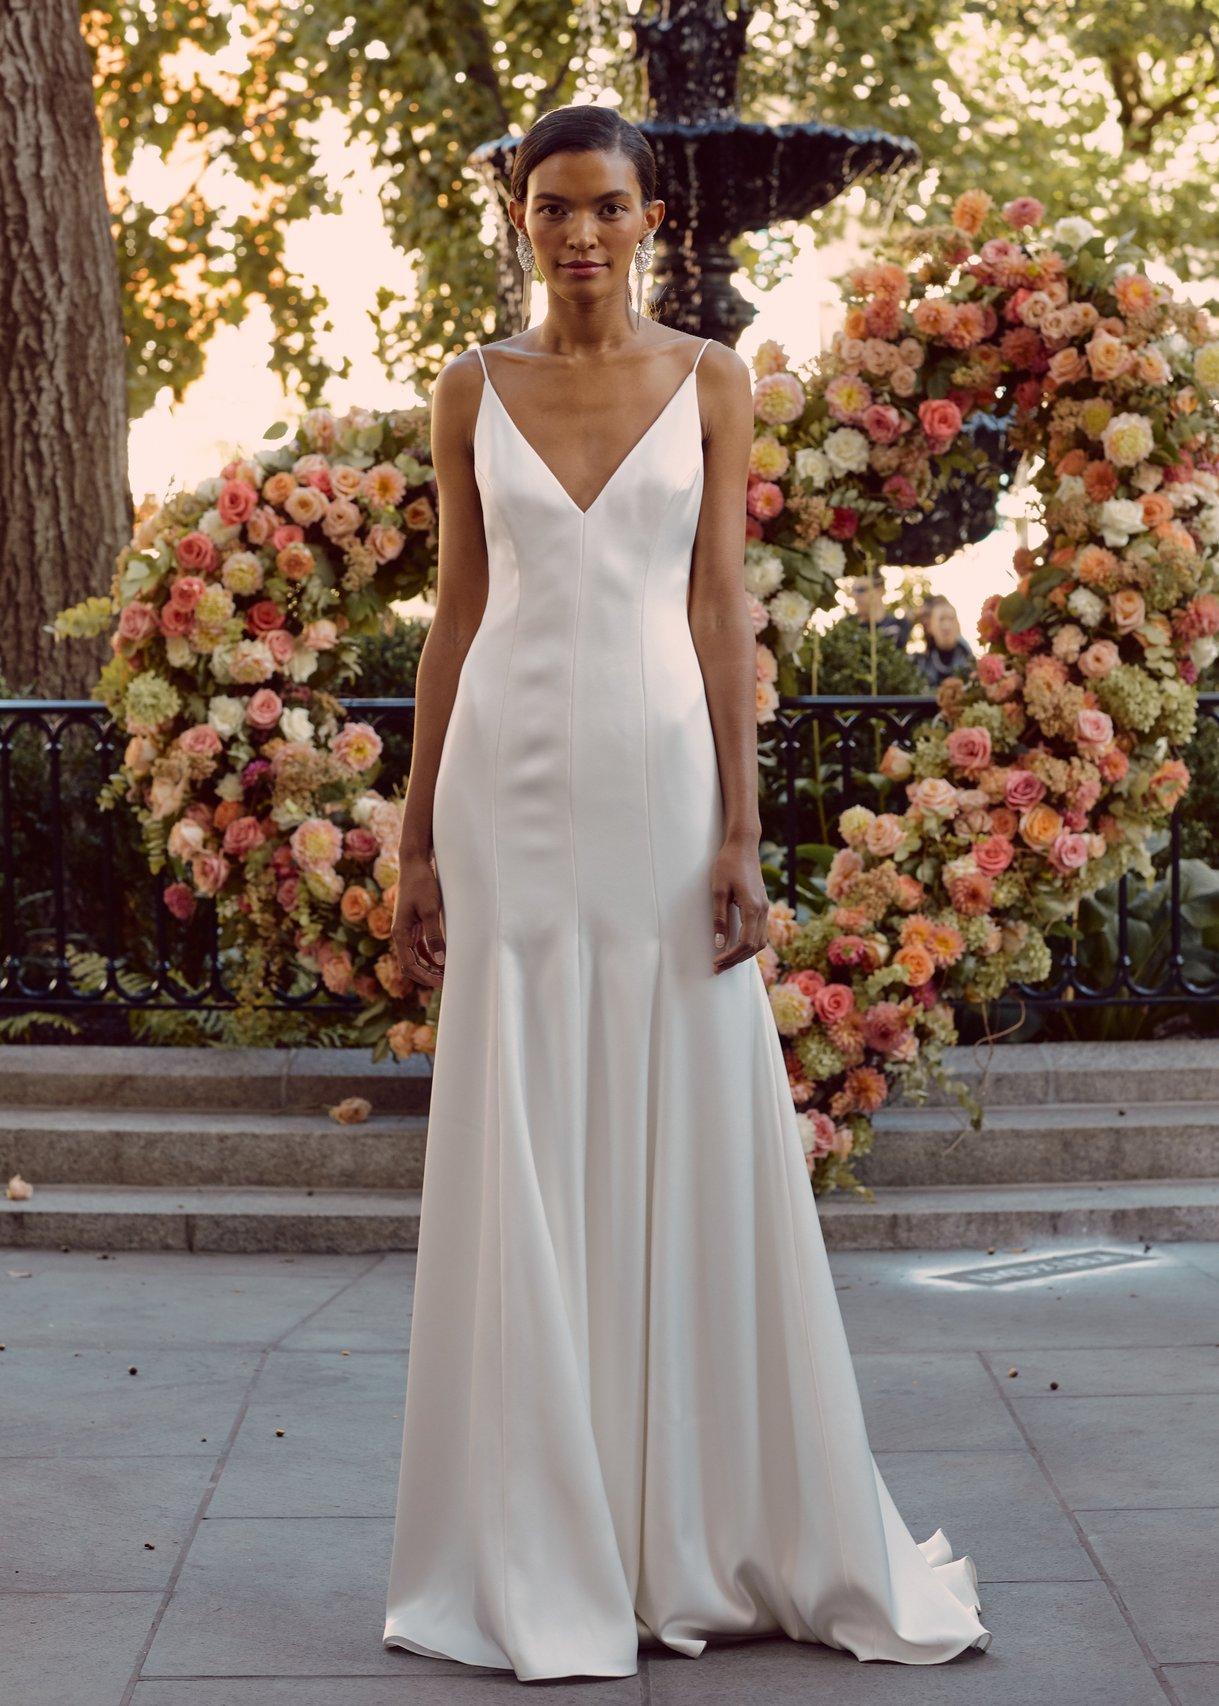 31 Minimalist Wedding Dresses That Are Simple and Understated